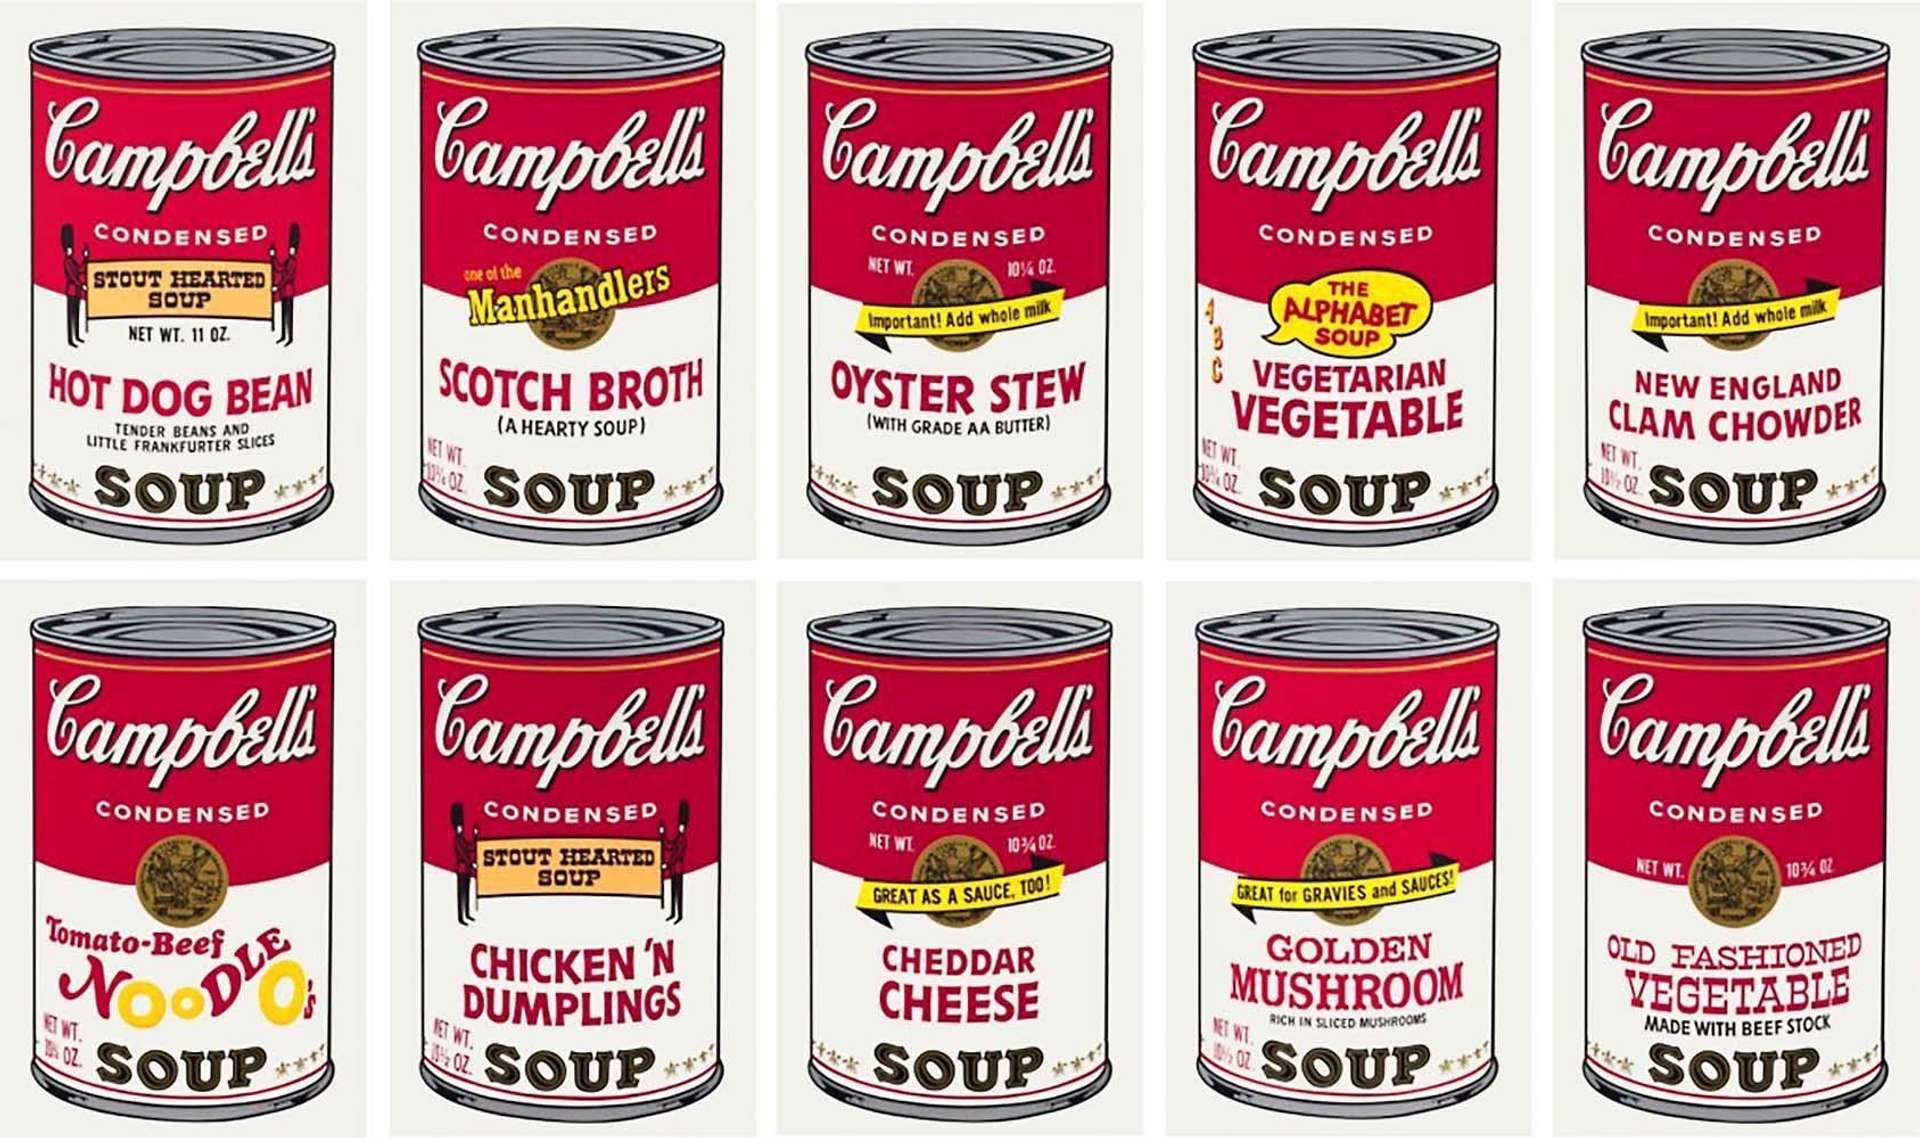 Campbell's Soup II (complete set) - Signed Print by Andy Warhol 1969 - MyArtBroker